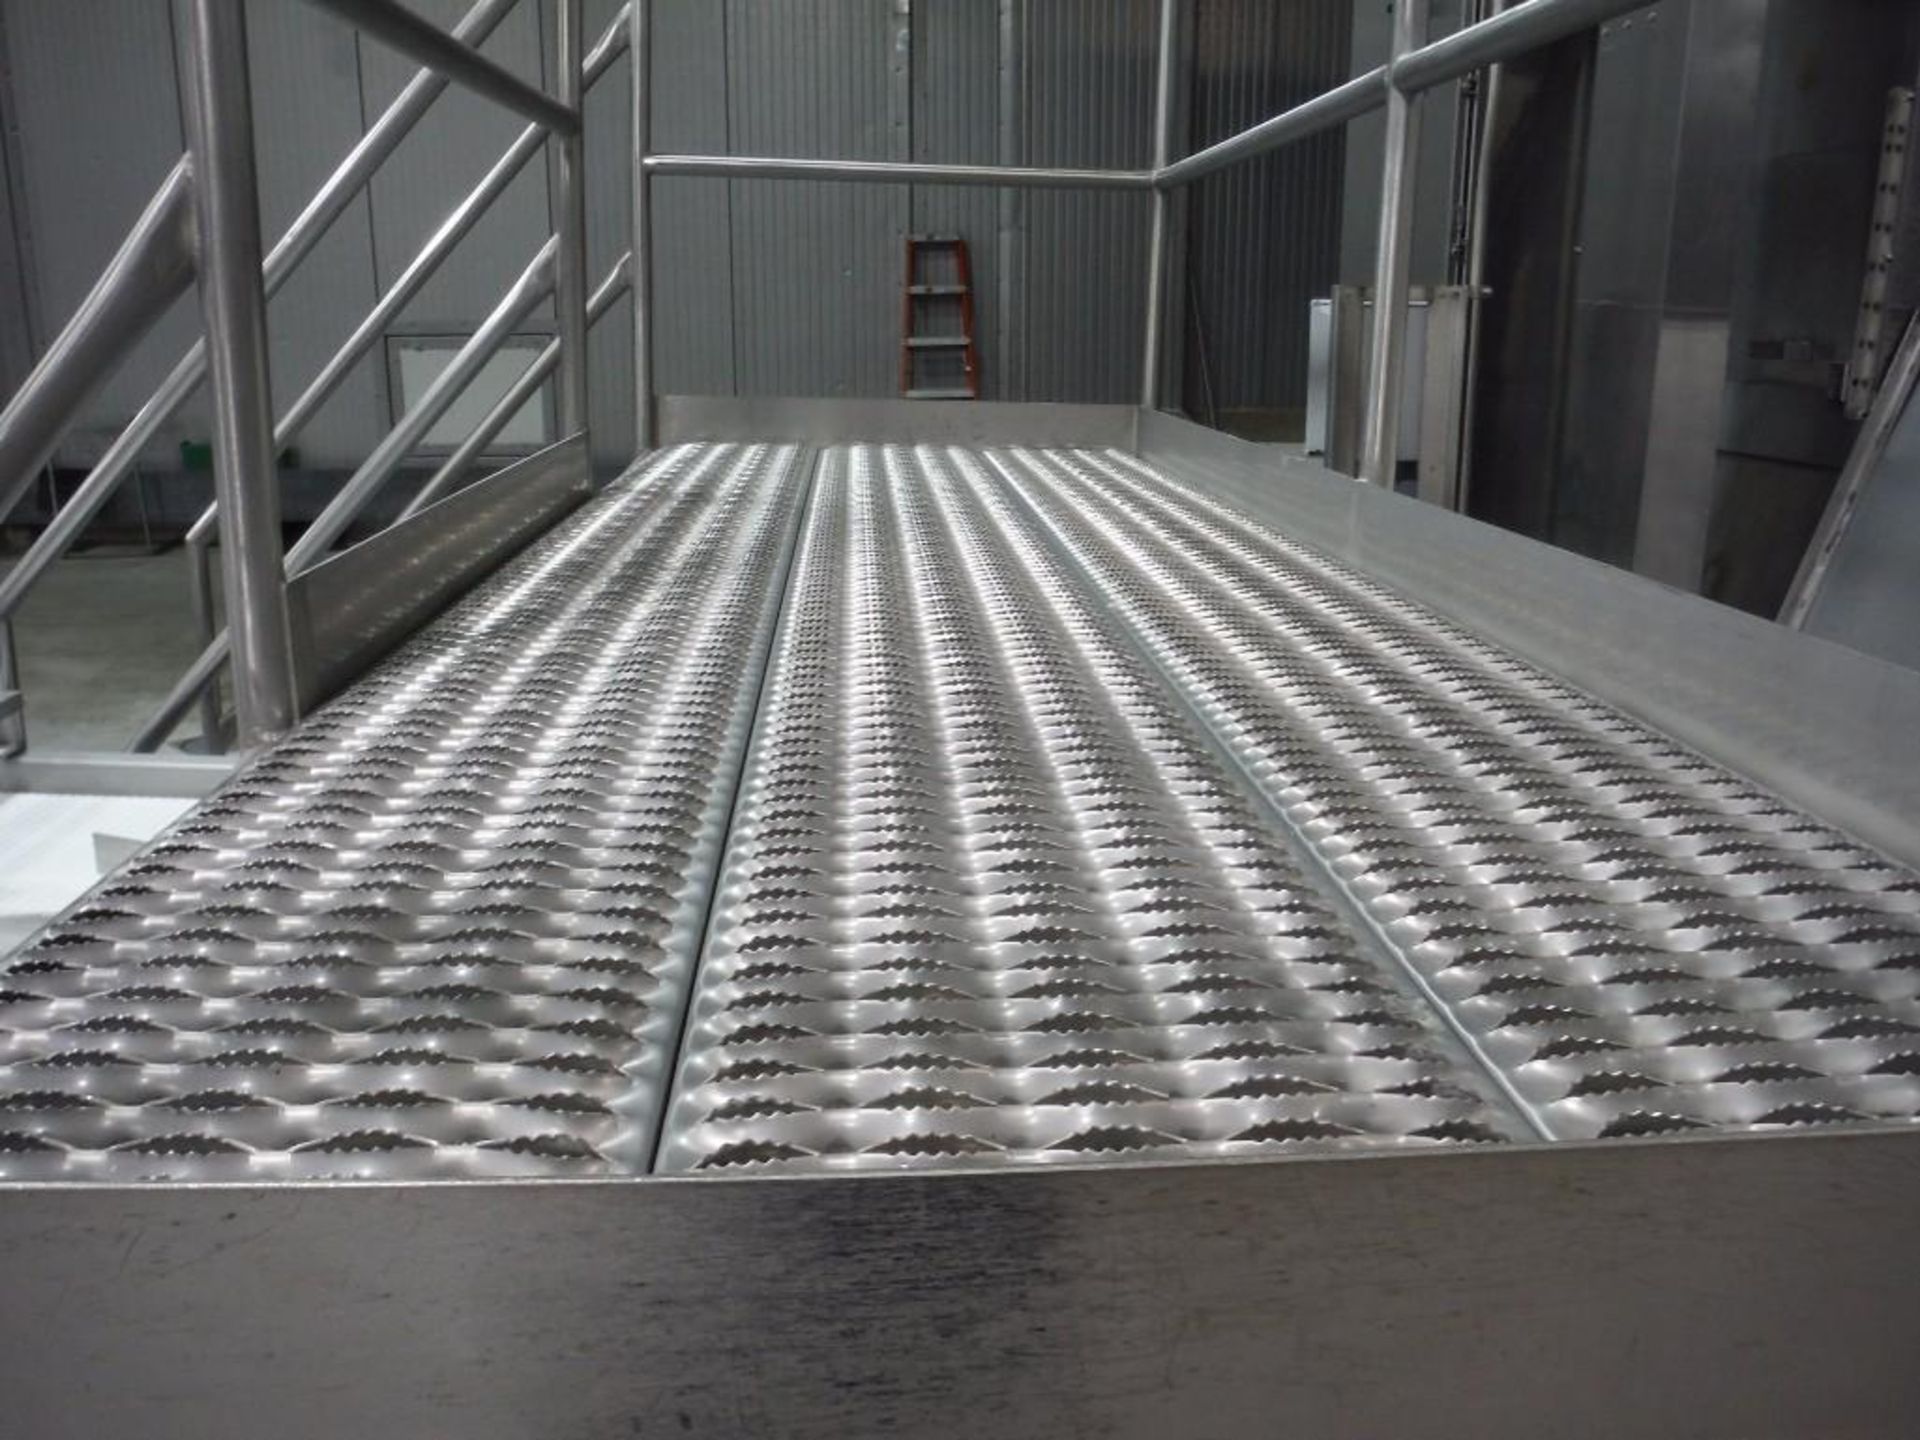 SS conveyor 4-step cross-over {Located in Marshall, MN} - Image 2 of 2